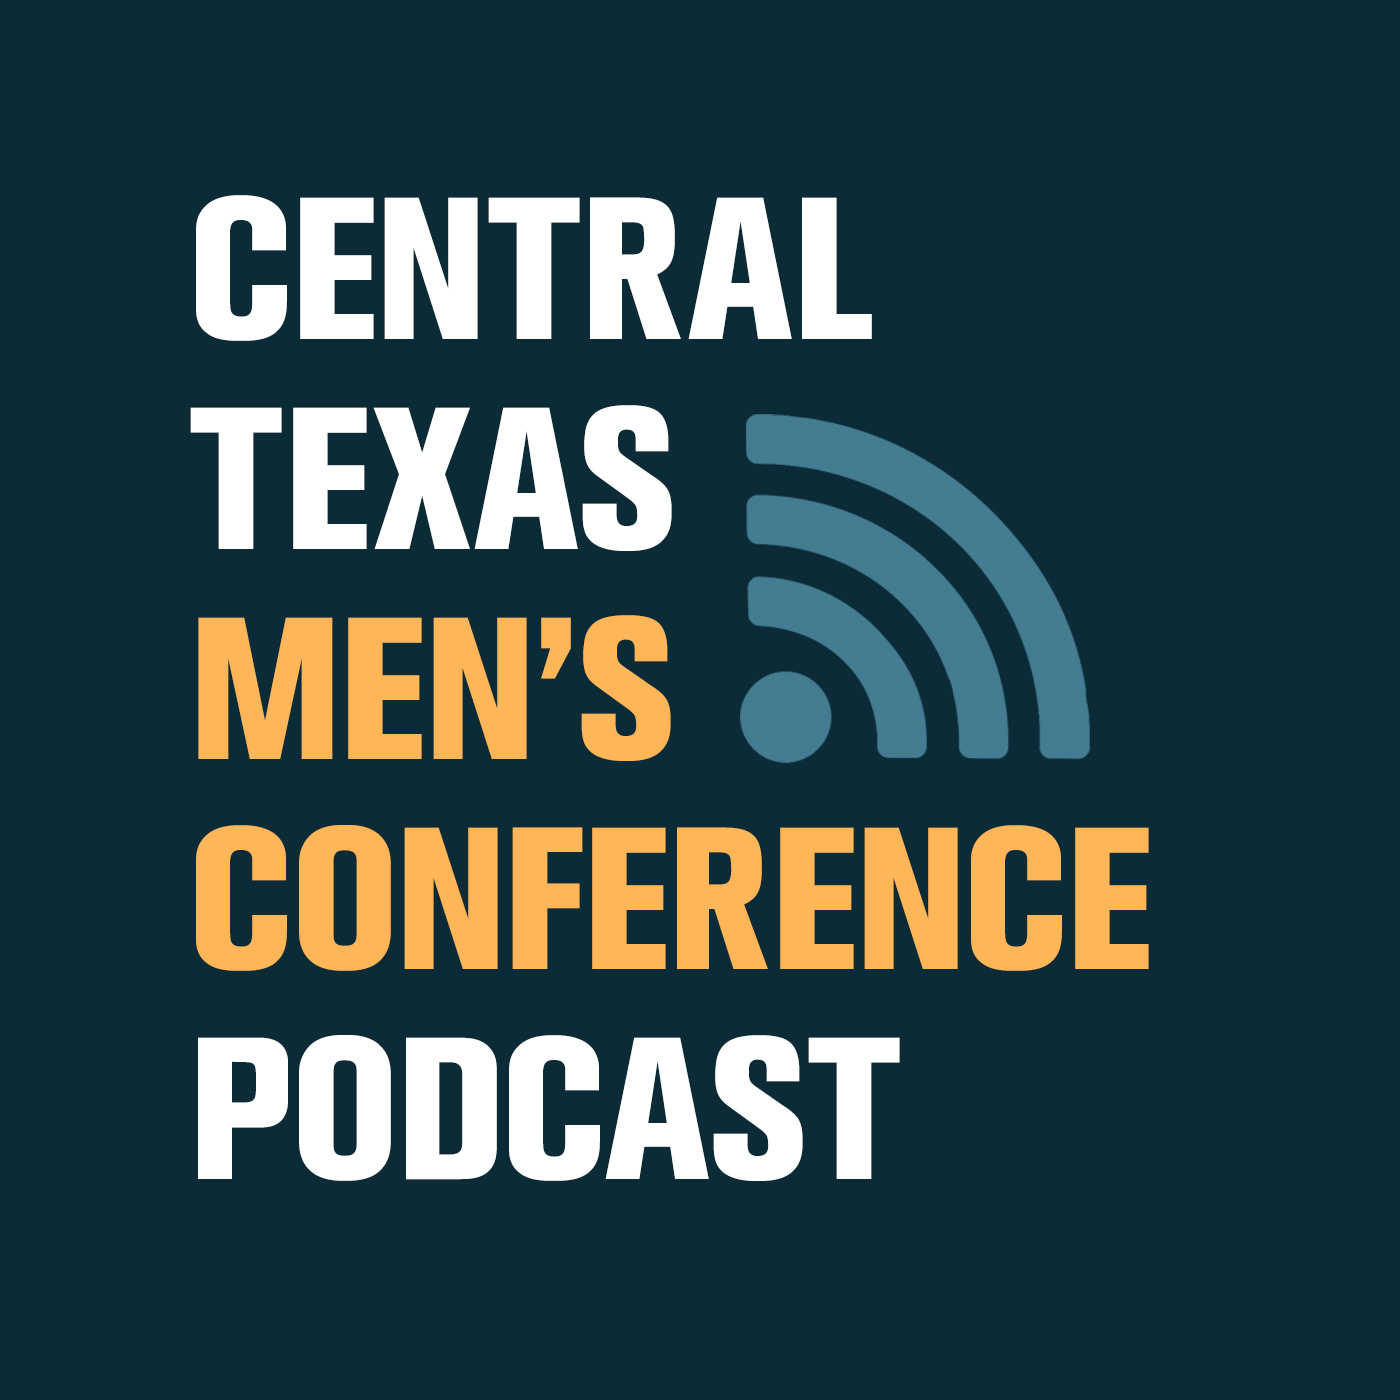 Central Texas Men's Conference Podcast